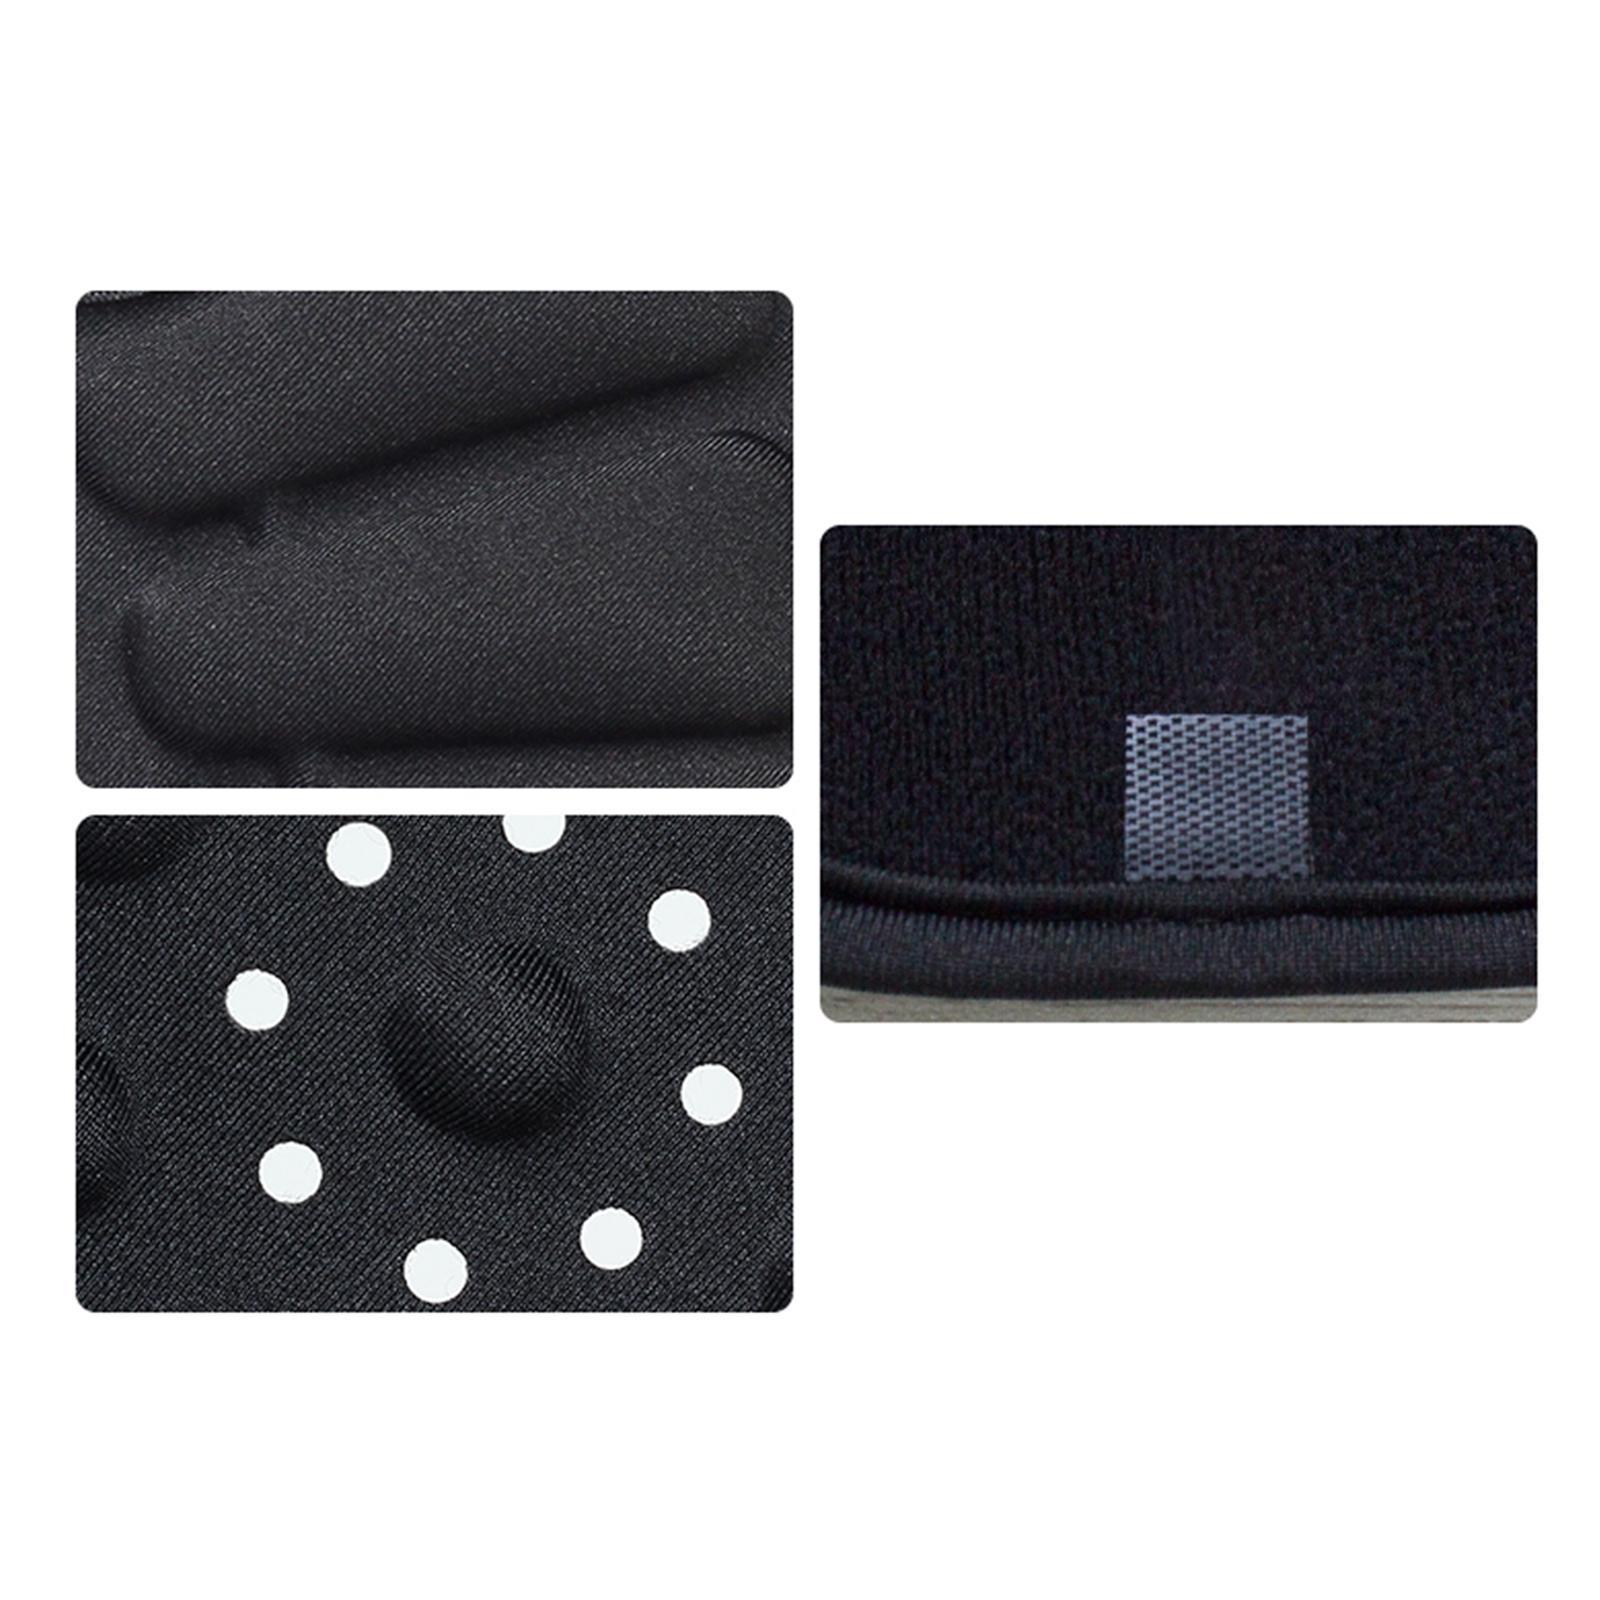 Helmet Liner Pad Protection Pad Cushion Reusable Protection Insert Universal